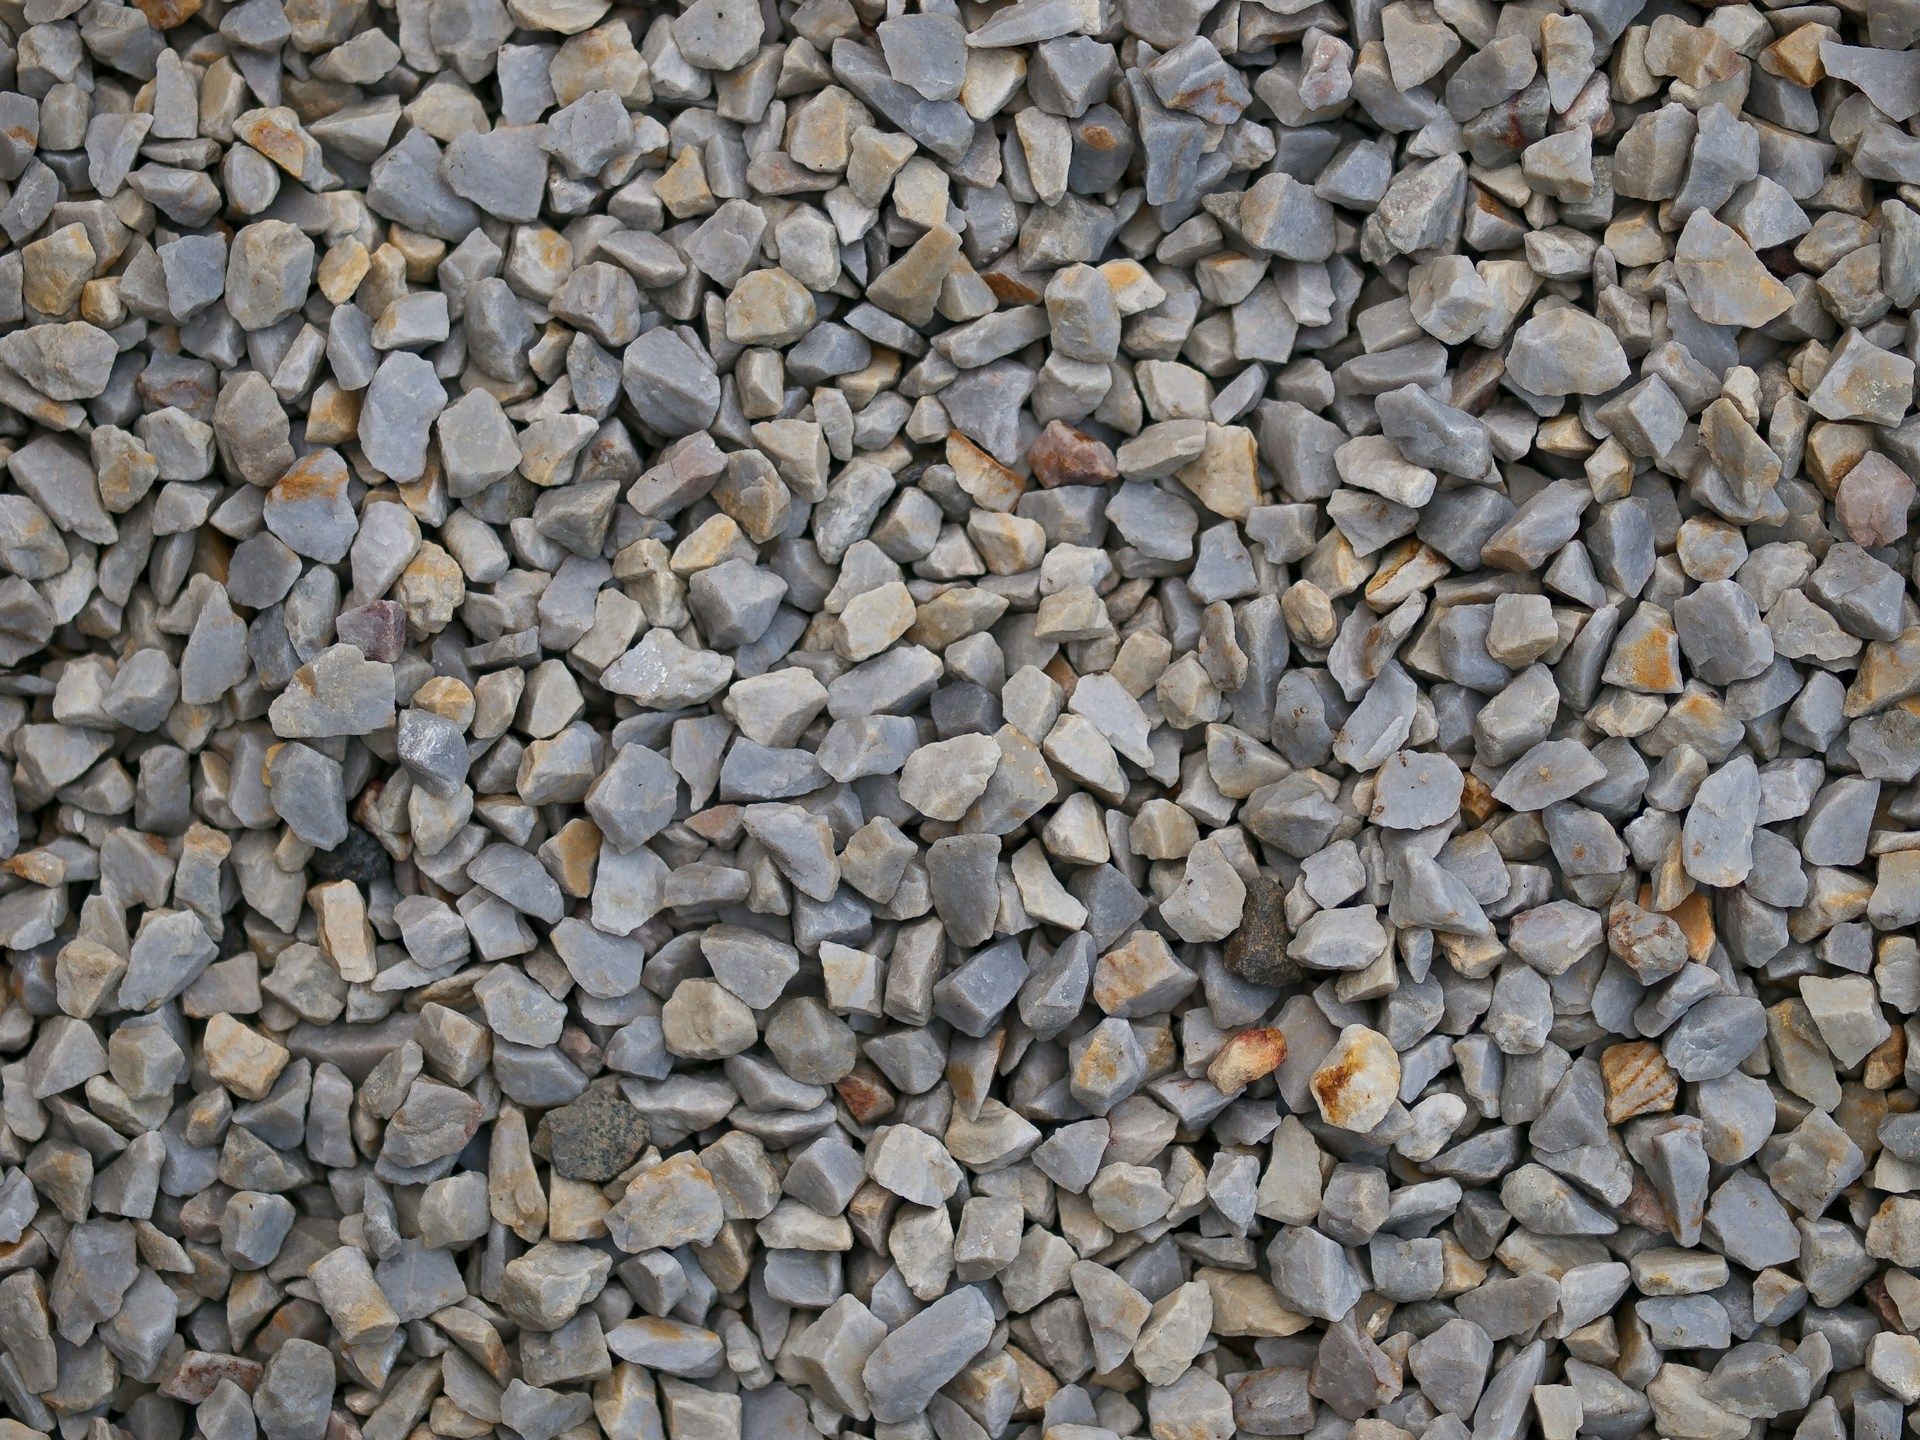 recycled aggregates